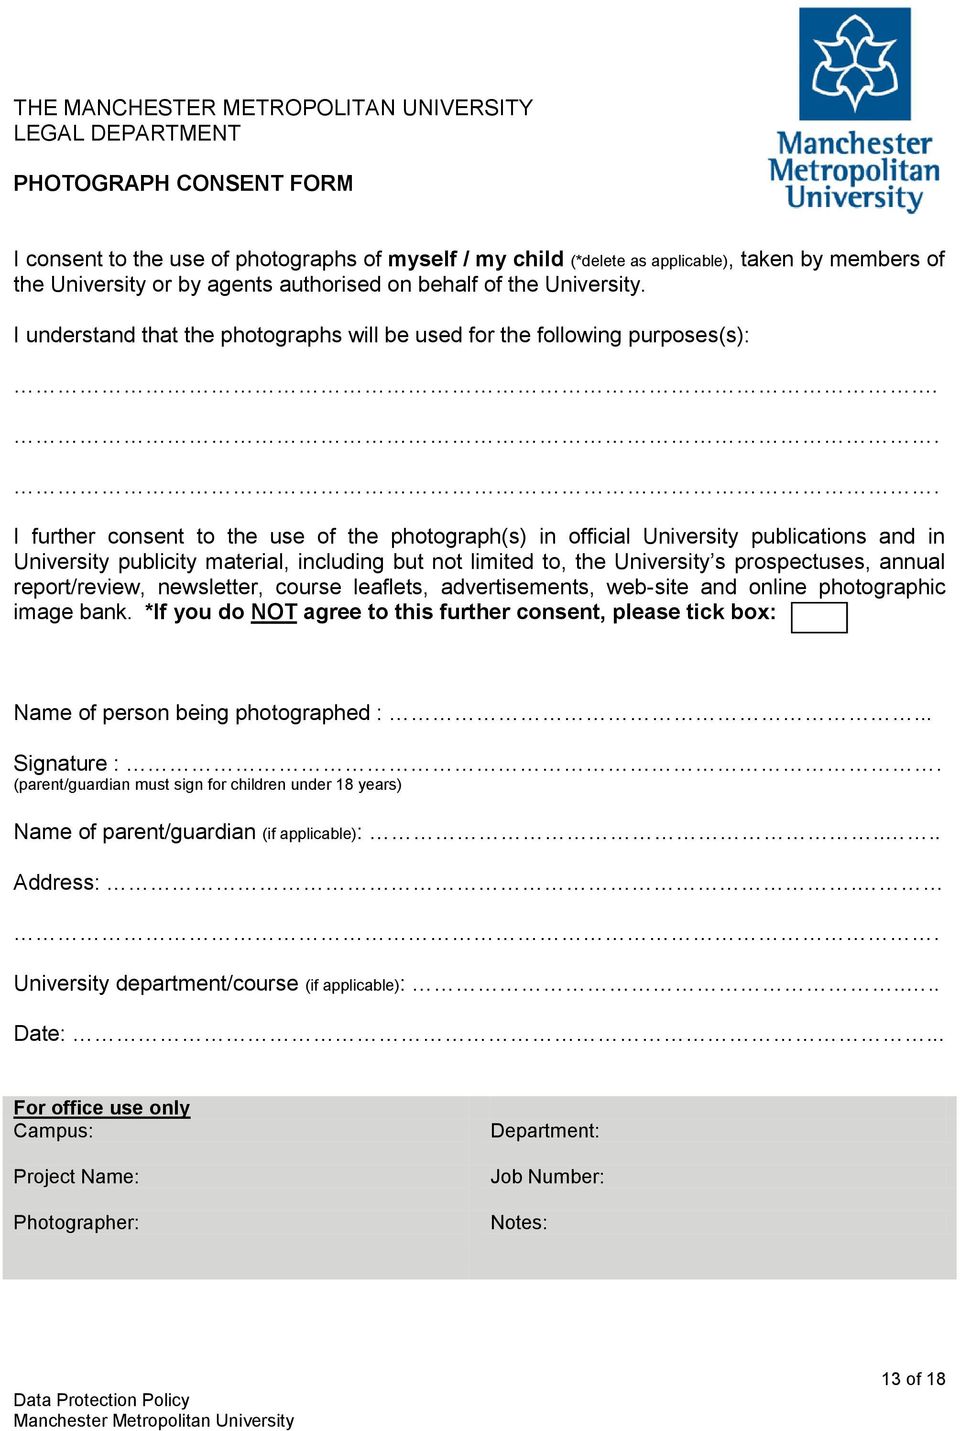 .. I further consent to the use of the photograph(s) in official University publications and in University publicity material, including but not limited to, the University s prospectuses, annual